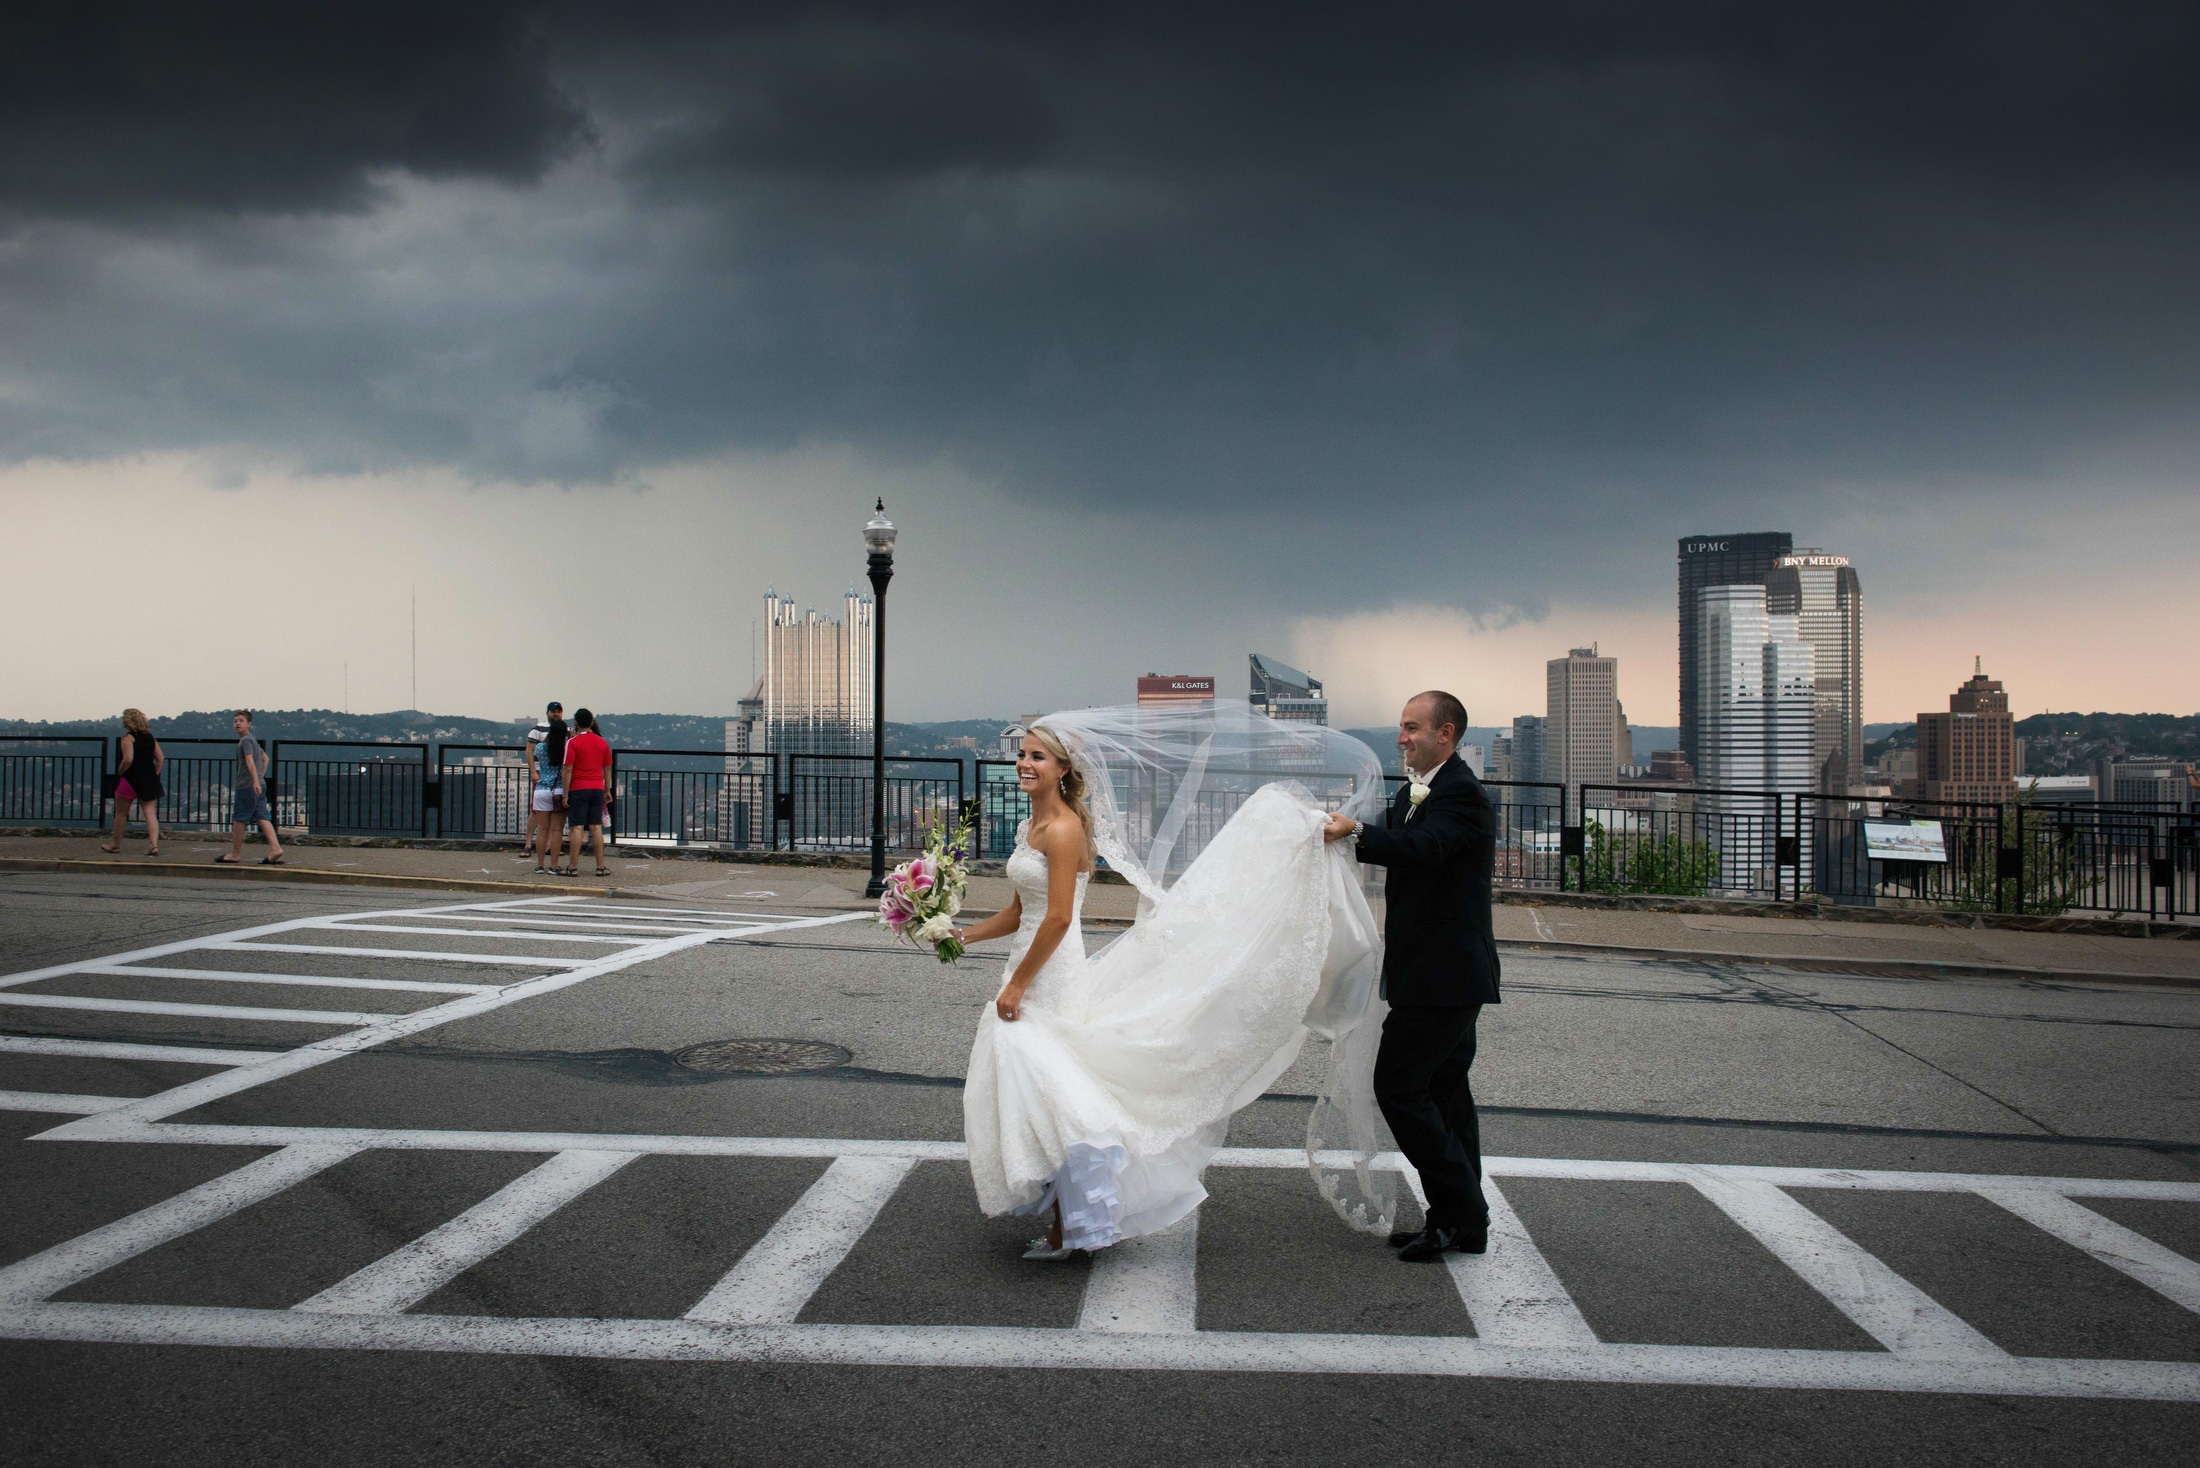 A bride and groom walk in a crosswalk on Grandview Avenue on Mt. Washington. The groom holds the bride's train while a storm approaches over downtown Pittsburgh.